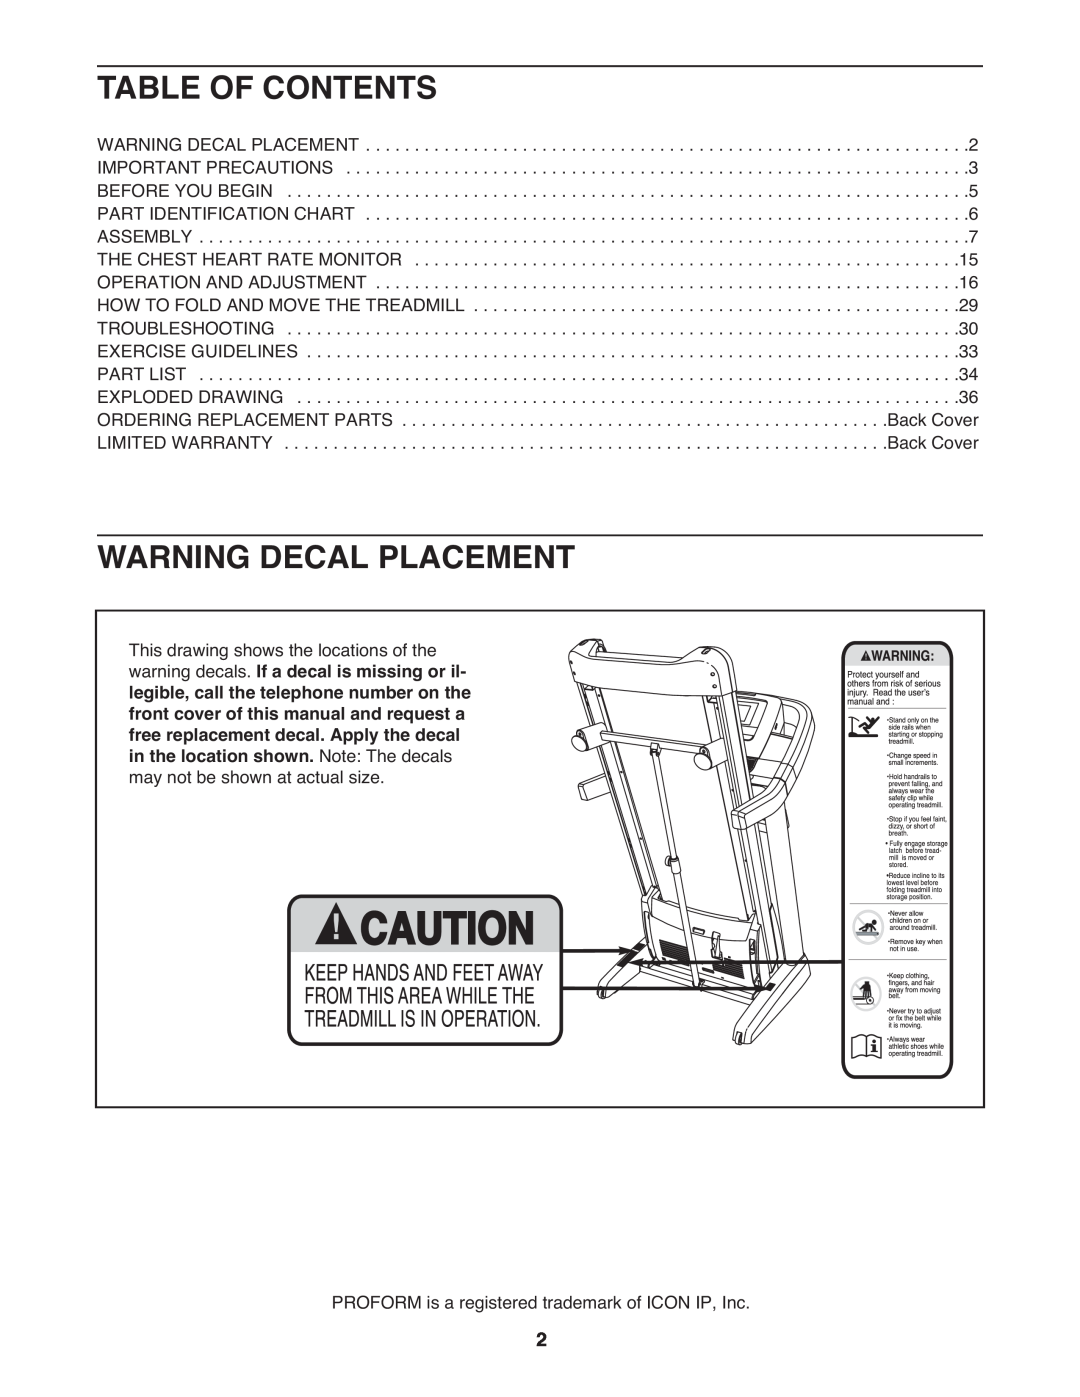 ProForm 2400 warranty Table Of Contents, Warning Decal Placement, PROFORM is a registered2trademark of ICON IP, Inc 